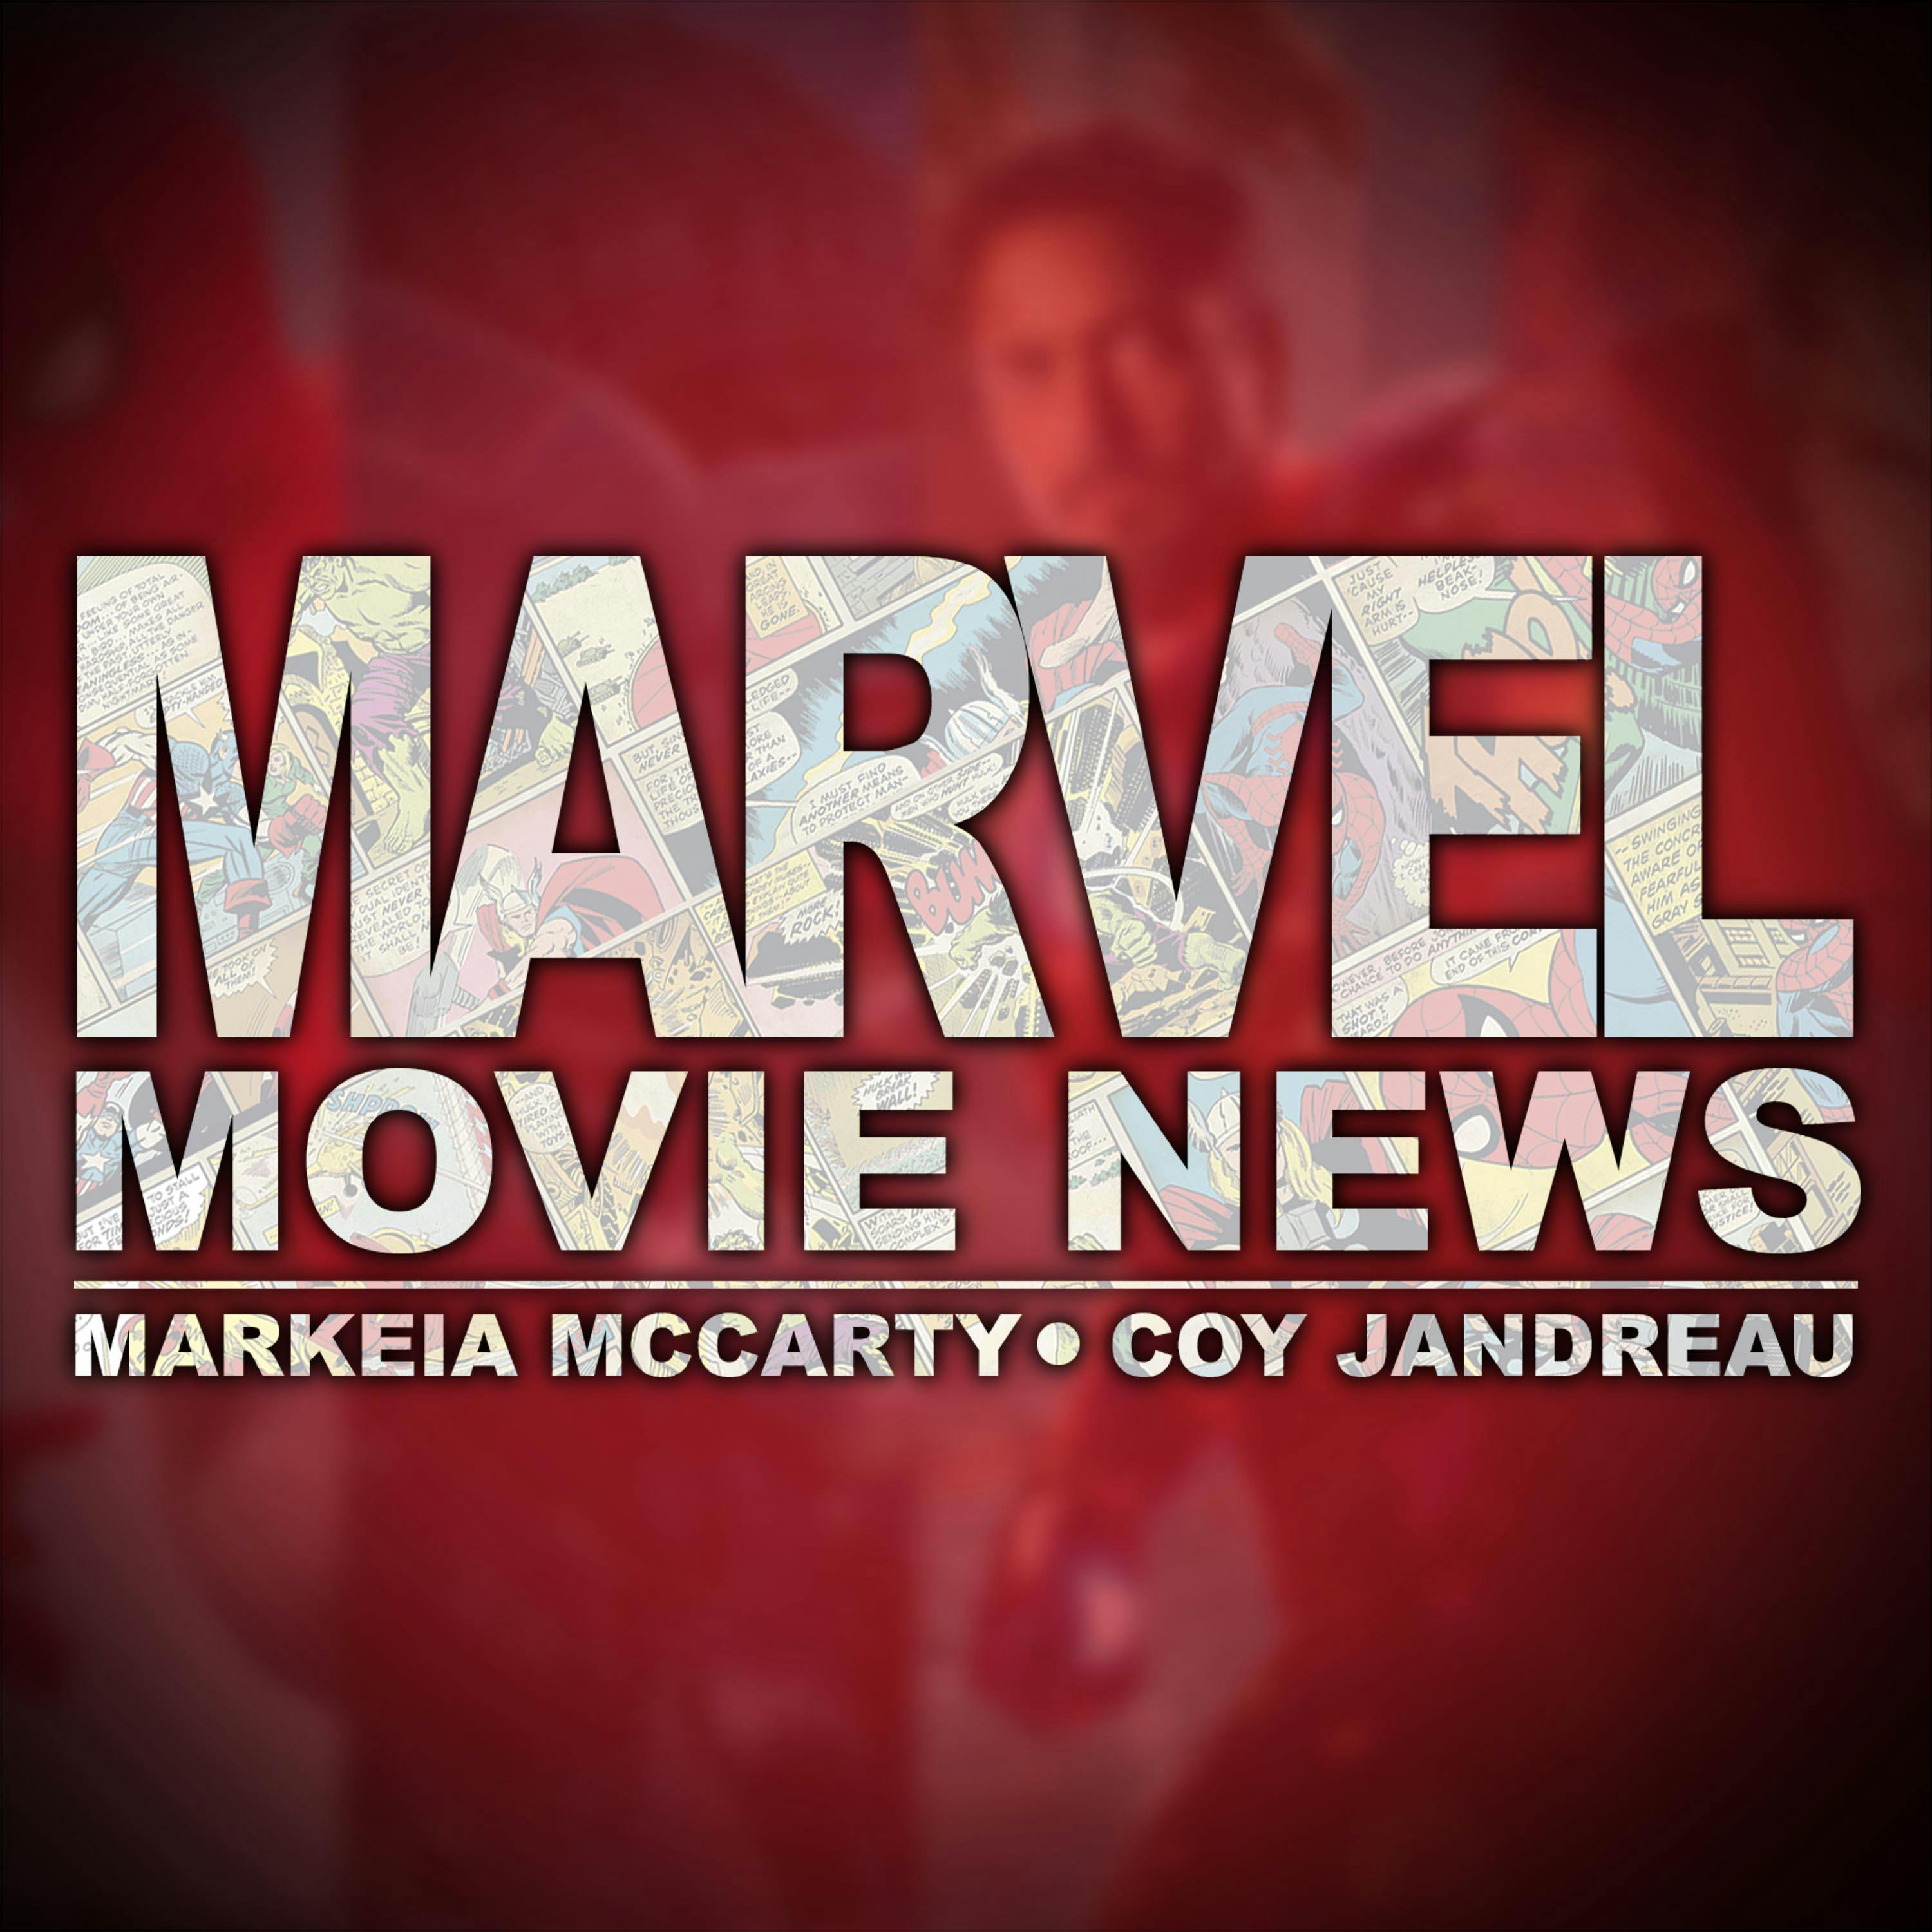 Black Panther Trailer, First New Mutants Trailer, The Future of the MCU | Marvel Movie News Ep 152